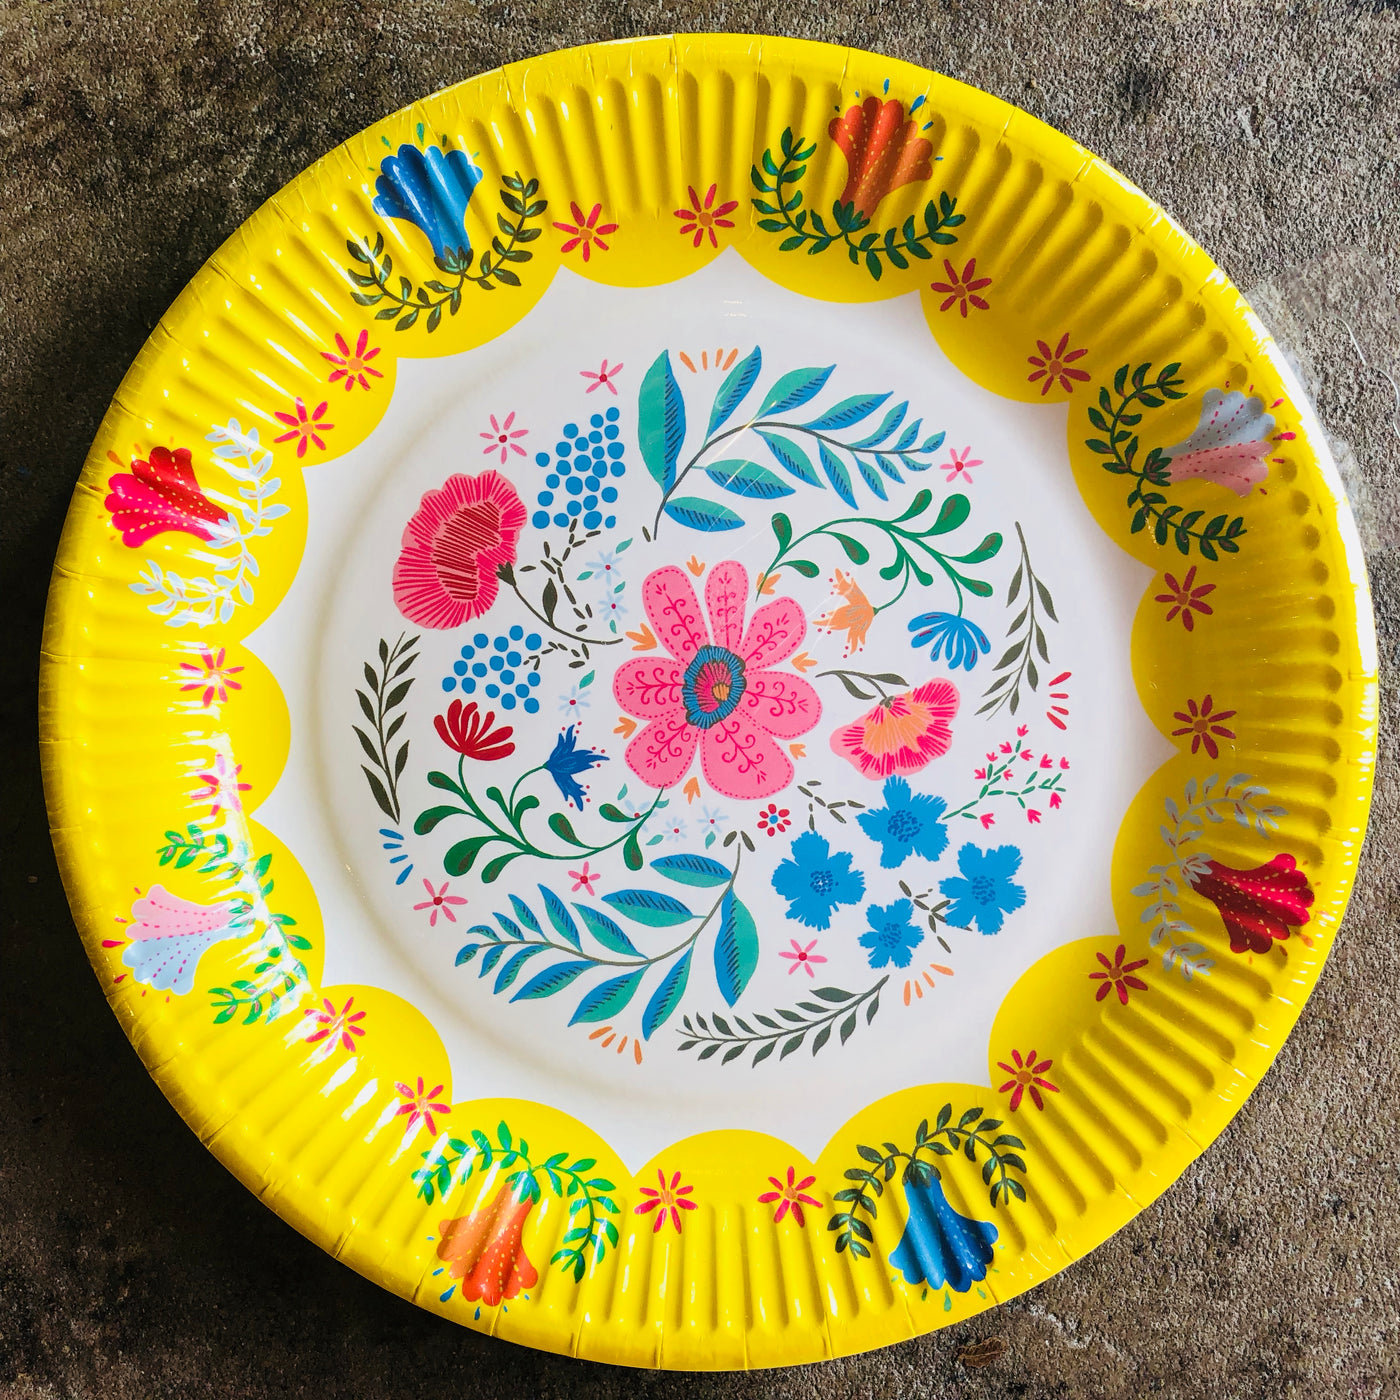 Top view of our floral paper plates. Plates have a yellow border. The design printed on the plates is an illustration of colorful flowers and foliage